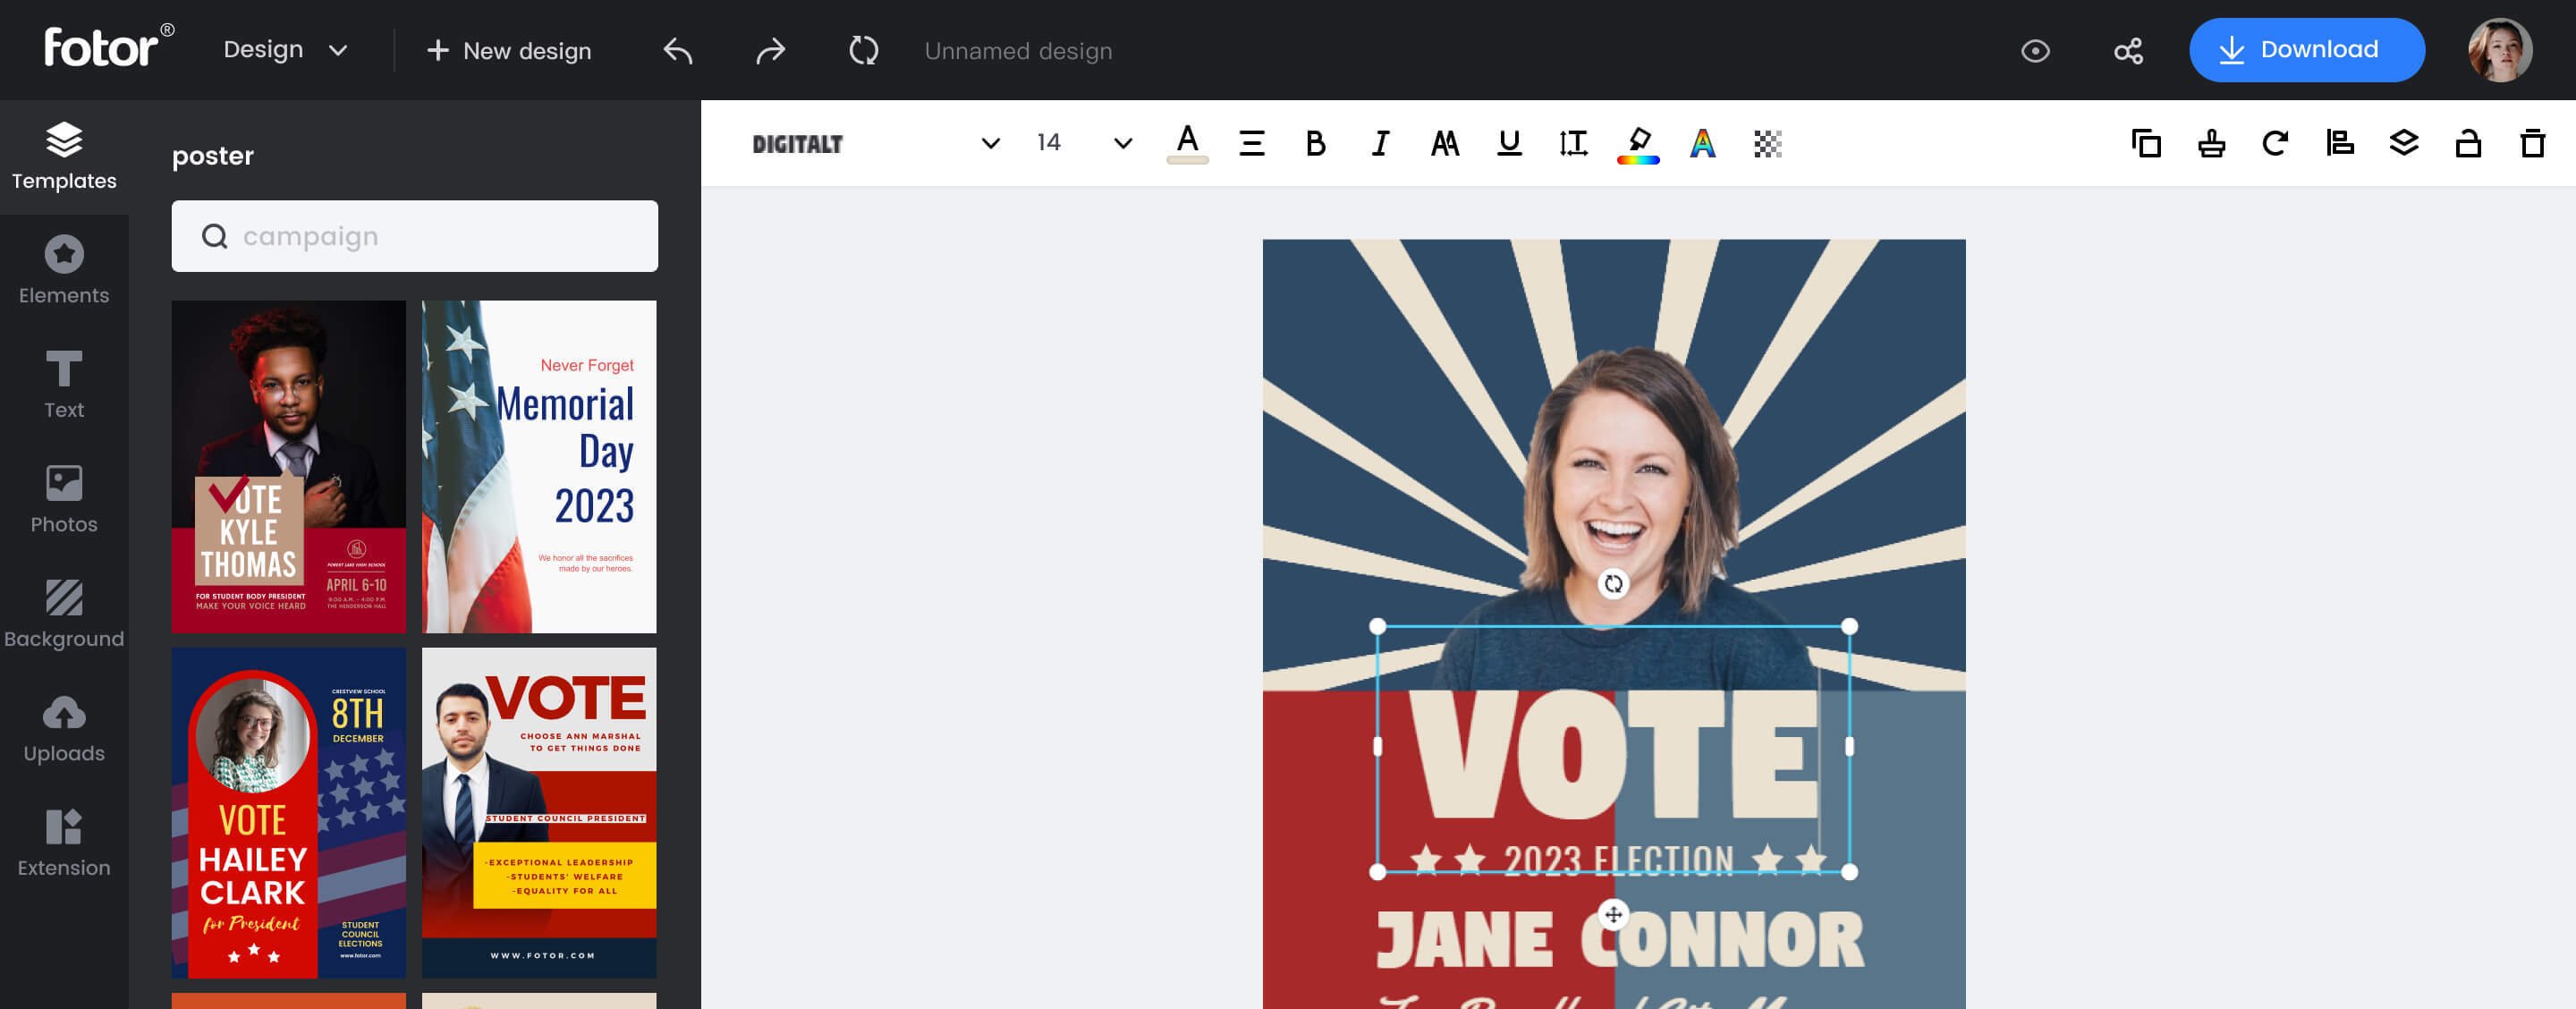 Free Campaign Poster Maker: Create a Campaign Poster Online - Fotor